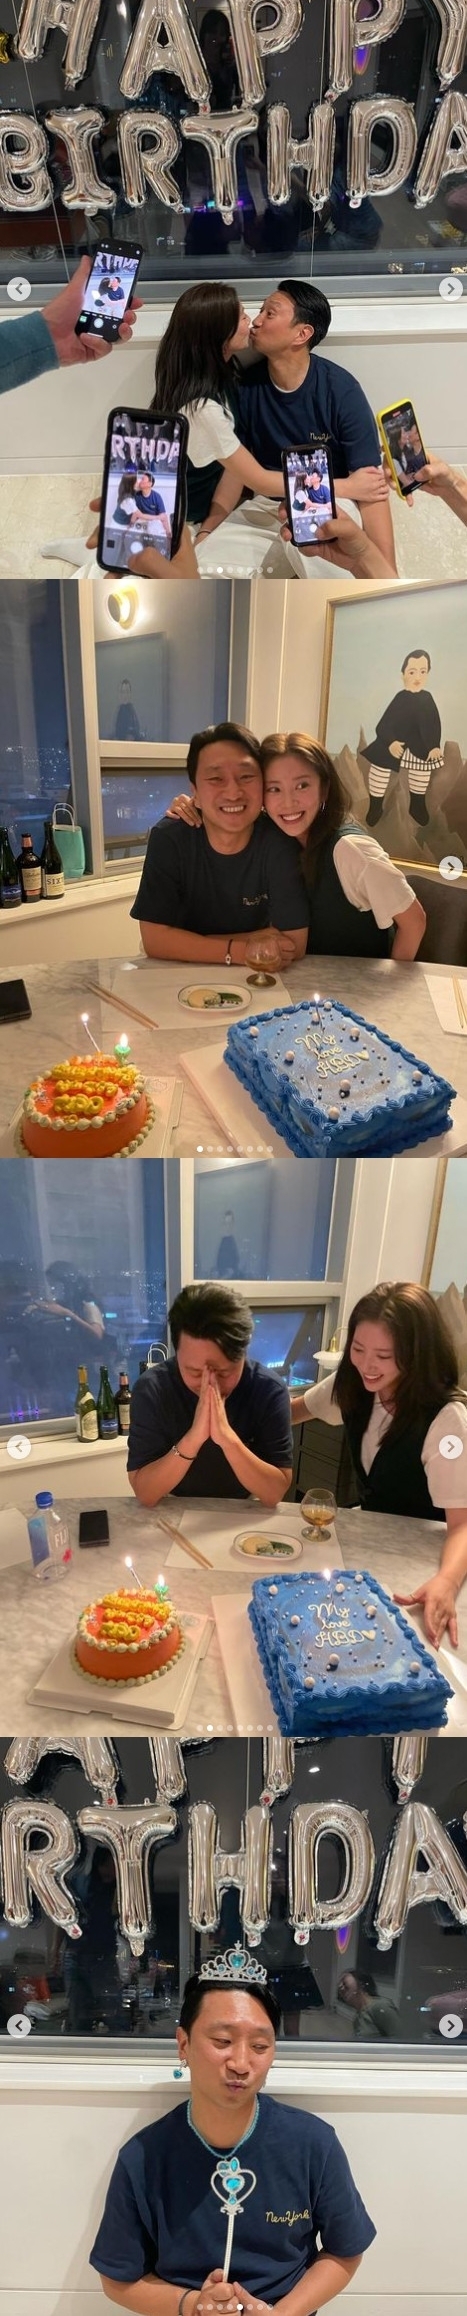 Seoul:) = Singer and actor Son Dam-bi celebrated her husband Lee Kyou-hyuks birthday.Son Dam-bi posted several photos on his 11th day with an article entitled My Love Happy Bus Day! Thank you all on his instagram.In the photo, Son Dam-bi is seen kissing Lee Kyou-hyuk, who was also invited to the party and is seen filming the pair on his mobile phone.Son Dam-bi also poses positively with Lee Kyou-hyuk in front of the cake, while Lee Kyou-hyuk focuses his attention on his birthday wishes or holding a magic rod while wearing a princess crown.Meanwhile, Son Dam-bi married former speed skater Lee Kyou-hyuk in May last year.